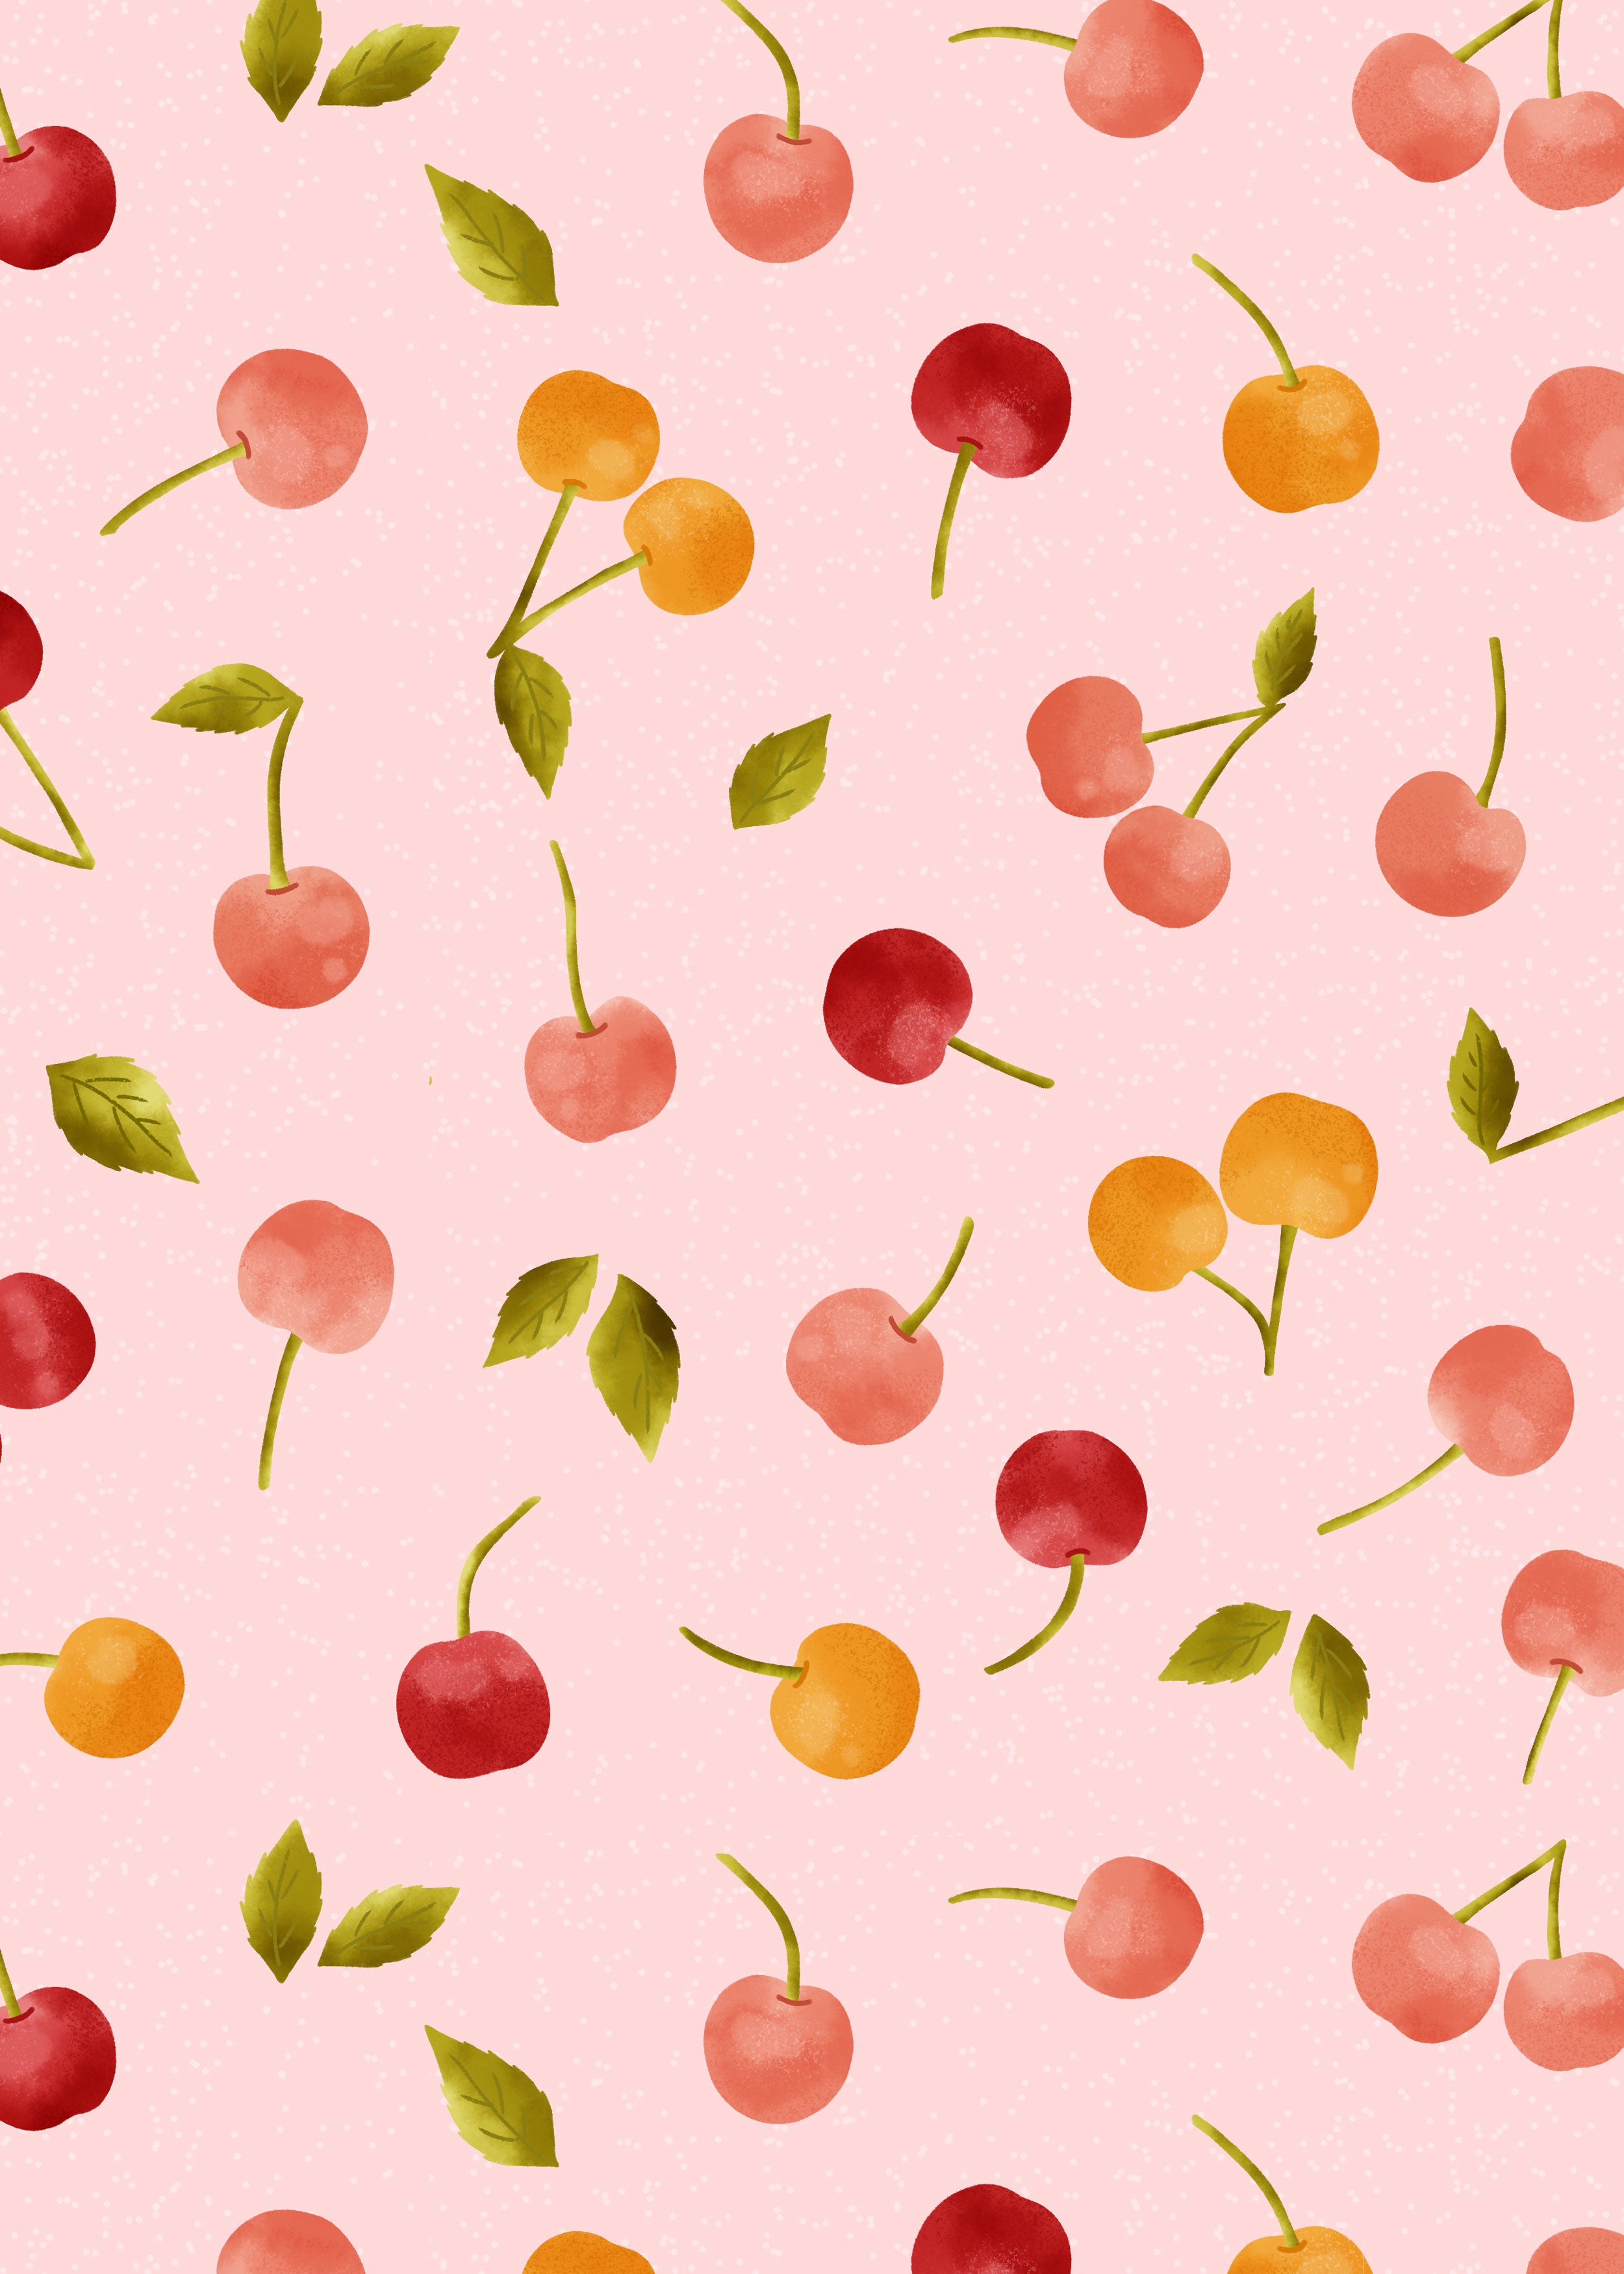 Cherries wallpaper - free downloadable background for desktop, phone and tablets